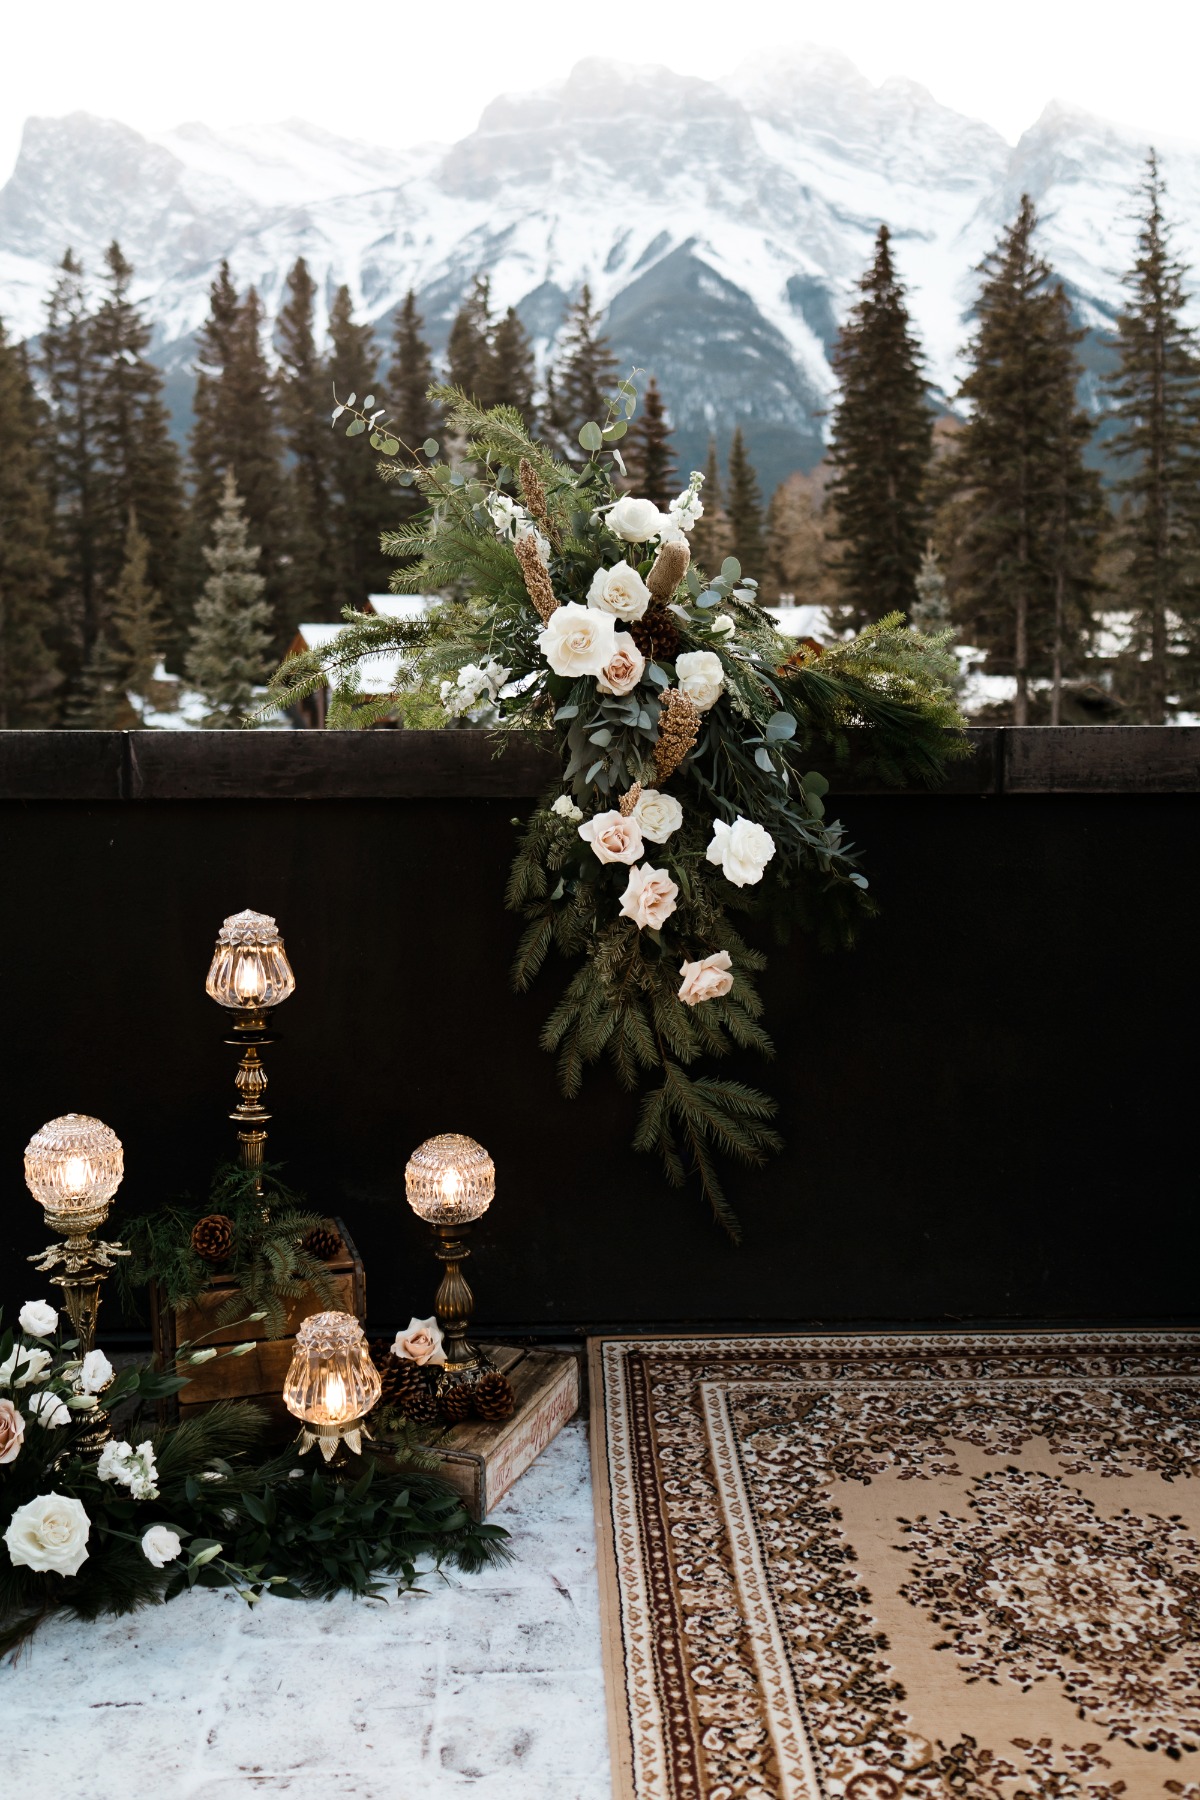 A Cozy Canmore Winter Elopement in the Mountains